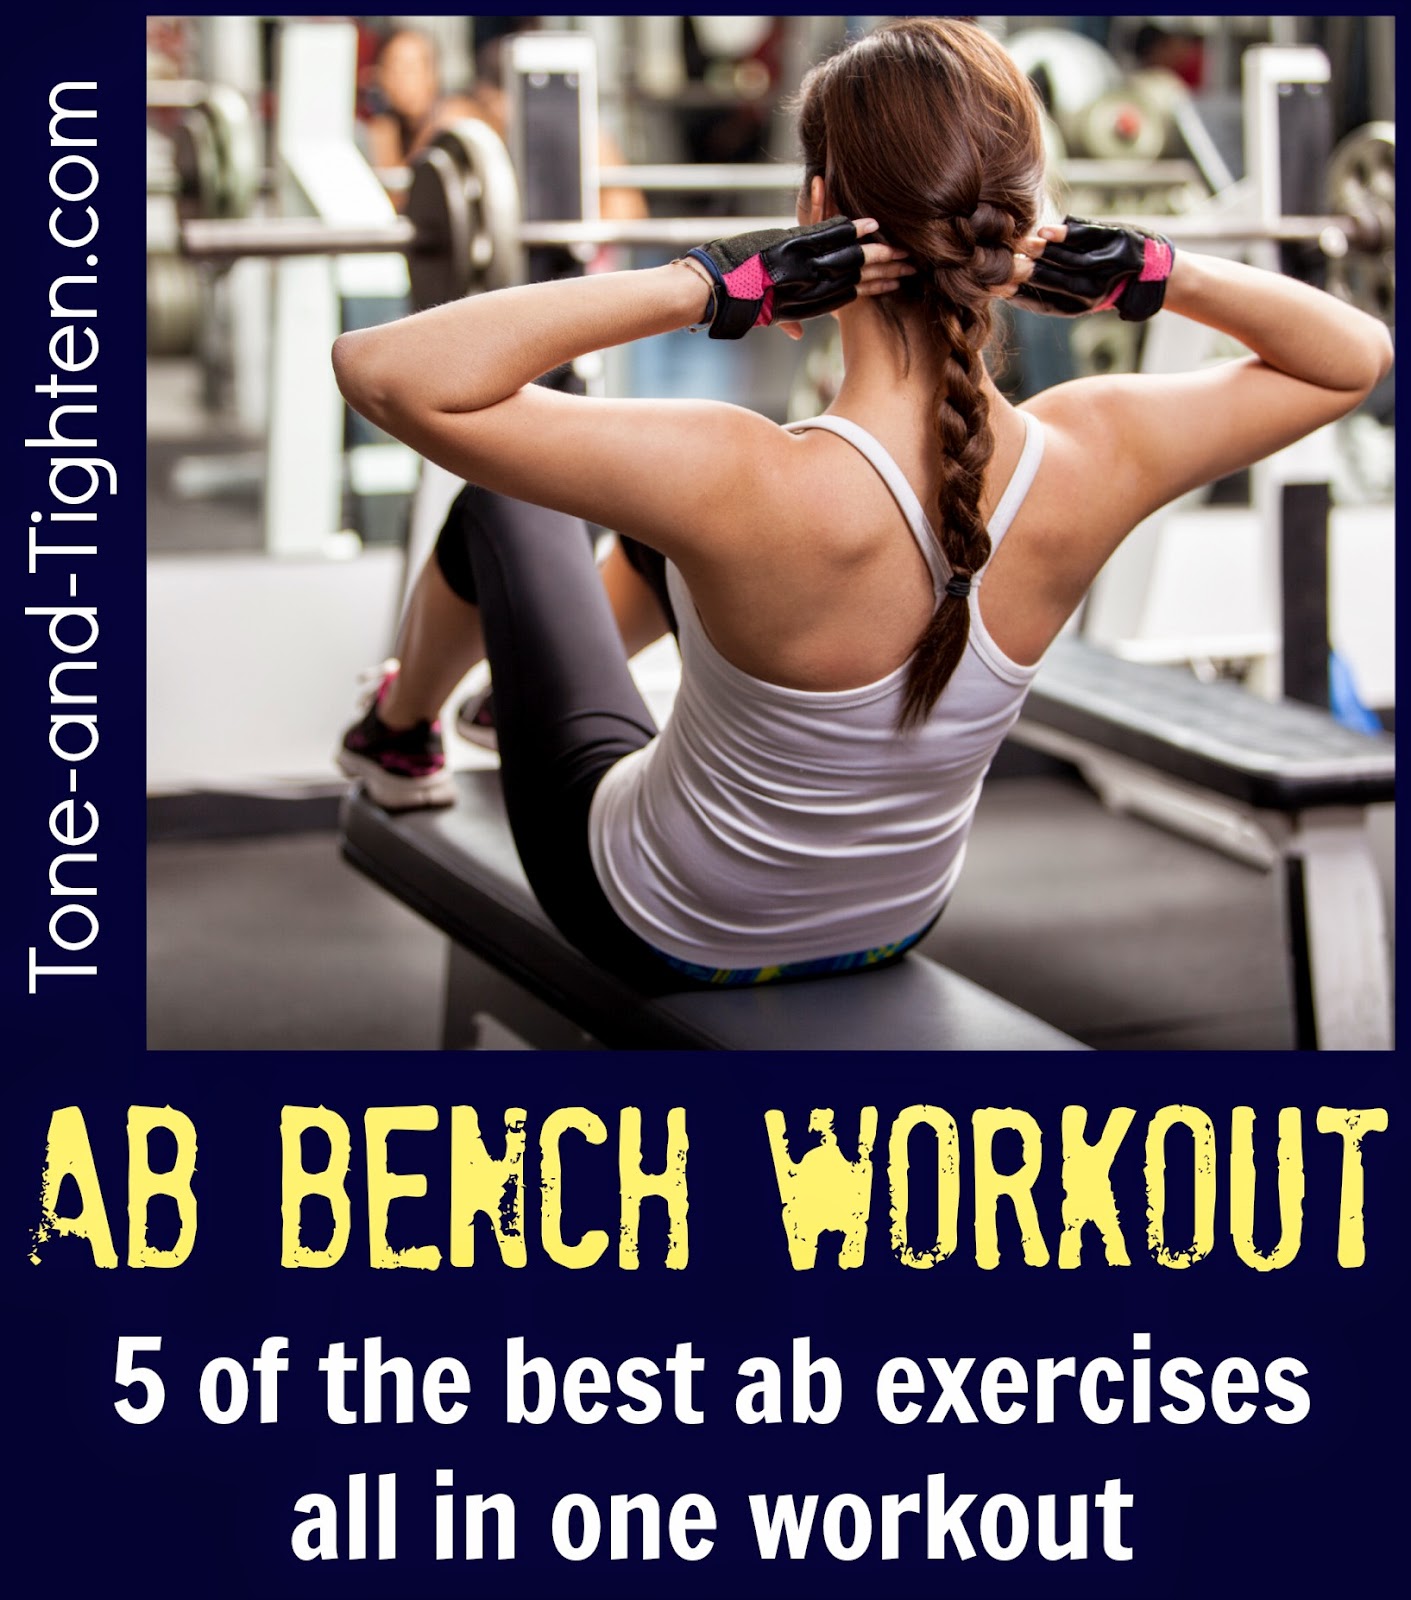 Ab workout on bench – Best bench exercises for your abs